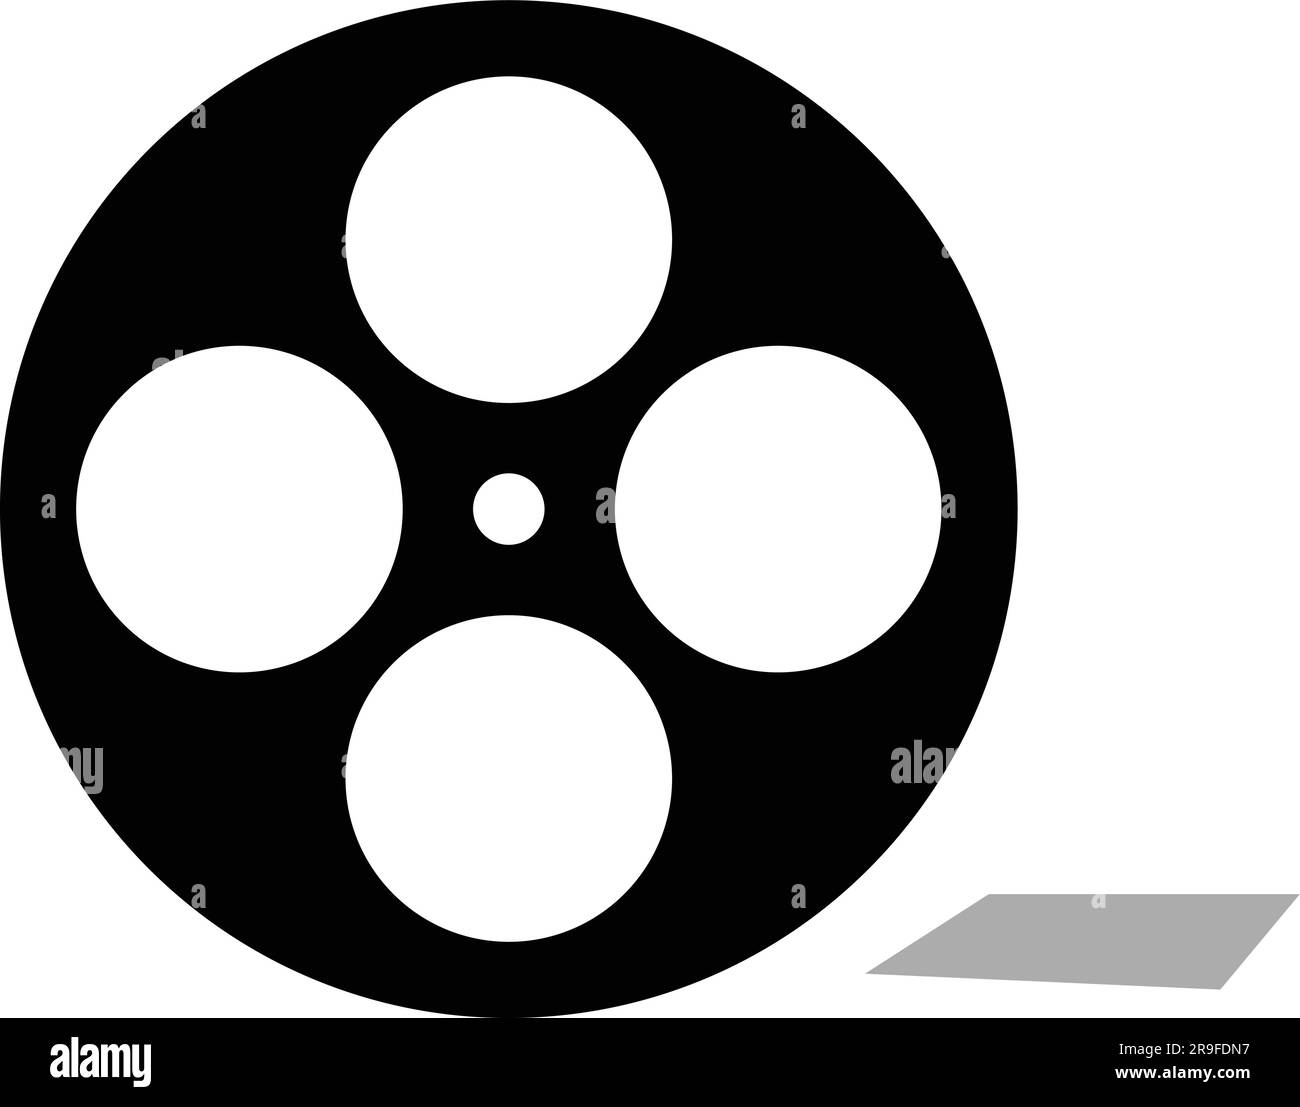 Film reel and twisted old cinema tape. Film reel movie icon. Old retro reel with film strip, Film recorder tape Stock Vector